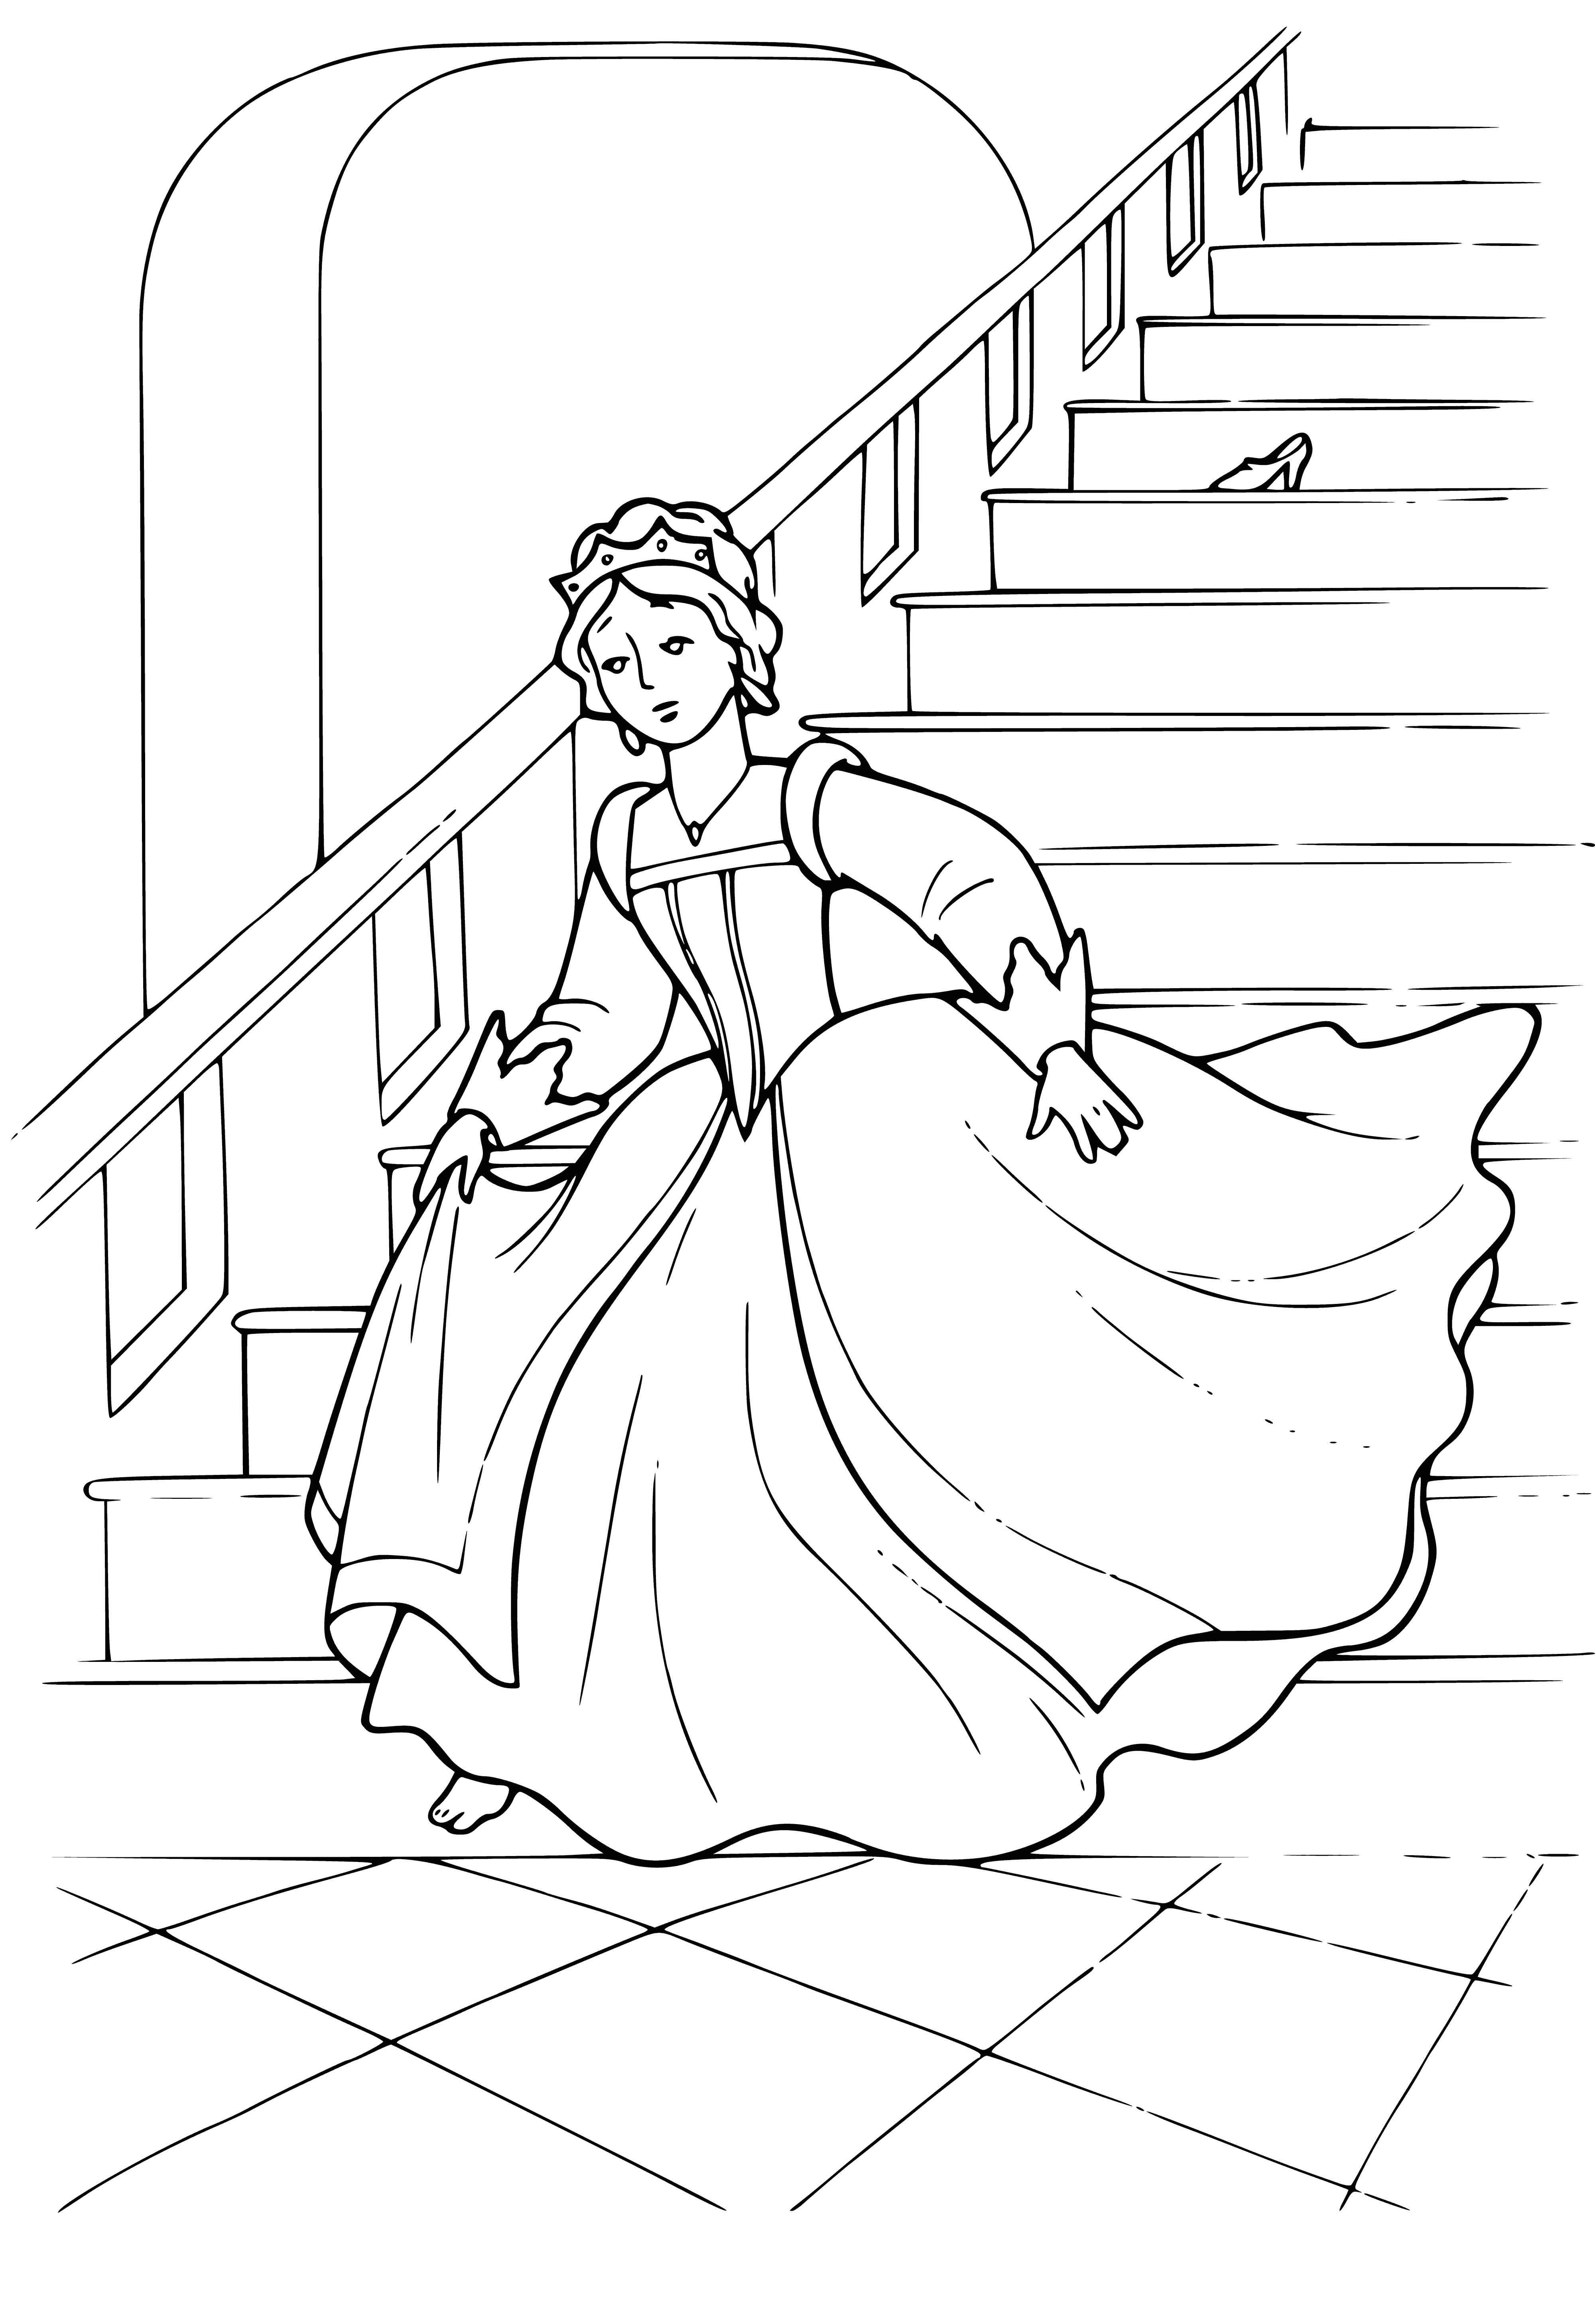 coloring page: Glass slipper on floor is small, delicate with pointed toe - made for child or young woman.